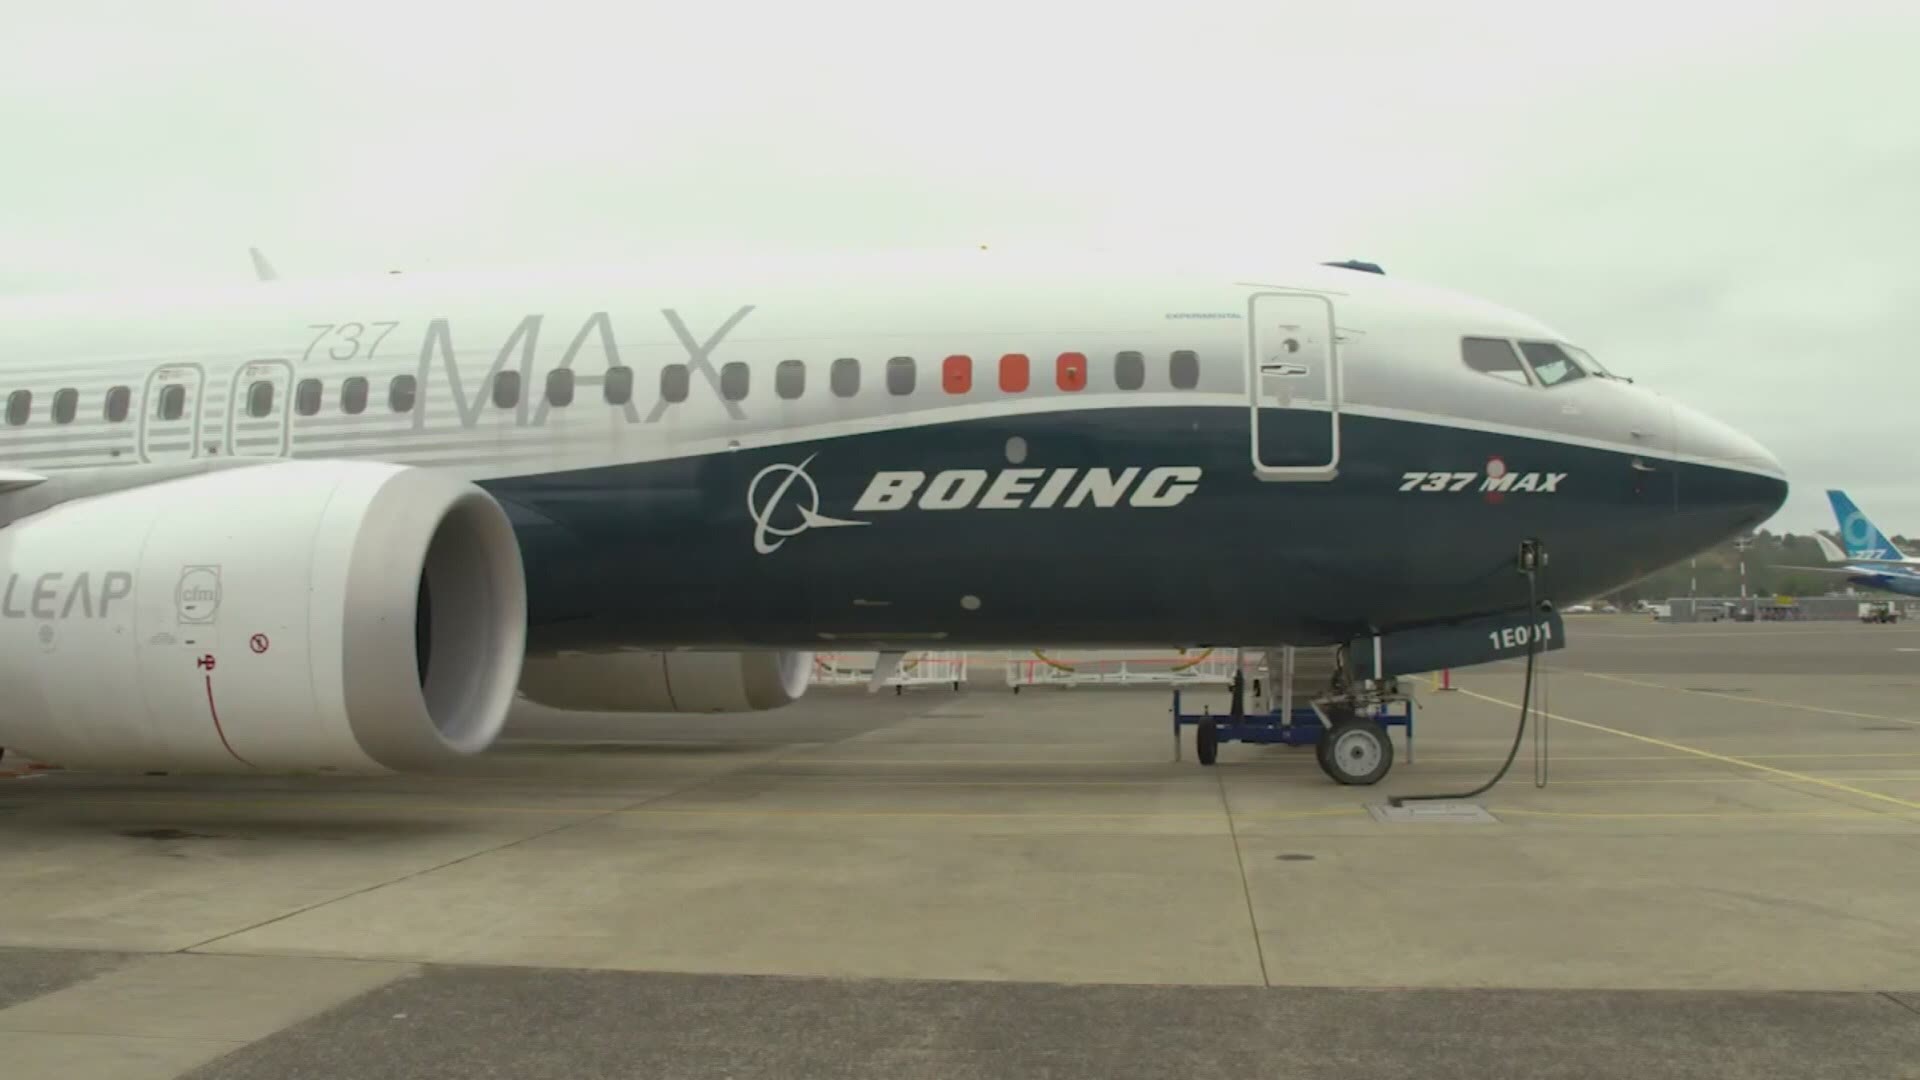 Reuters reports Boeing was asked to further analyze and show documentation that “numerous 737 MAX subsystems would not be affected by electrical grounding issues."